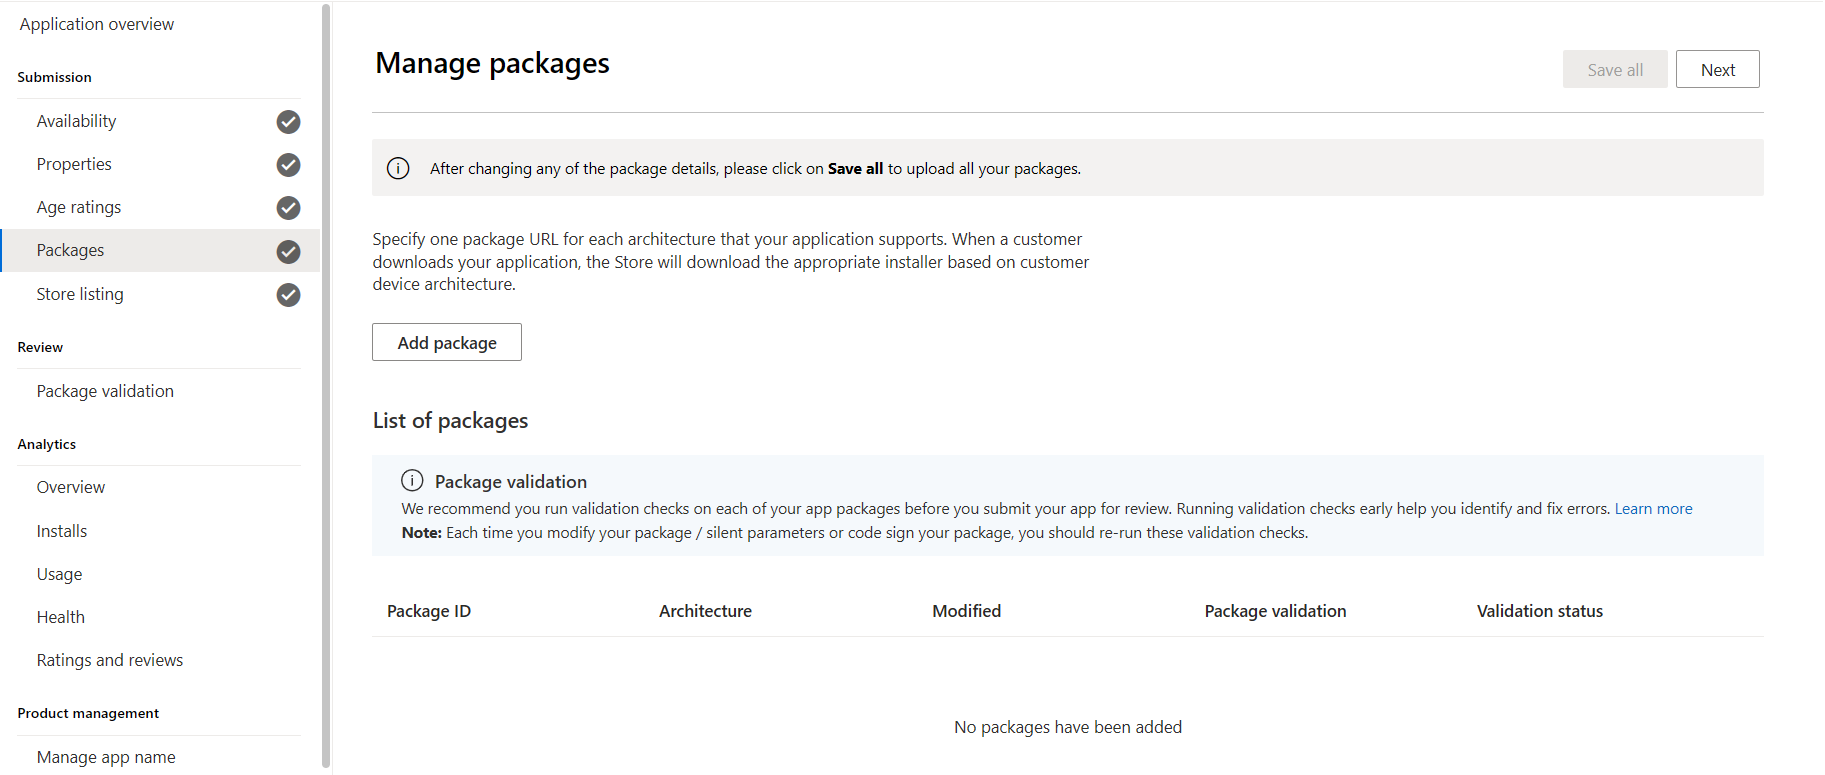 A screenshot of the overview of Packages section in Partner Center.